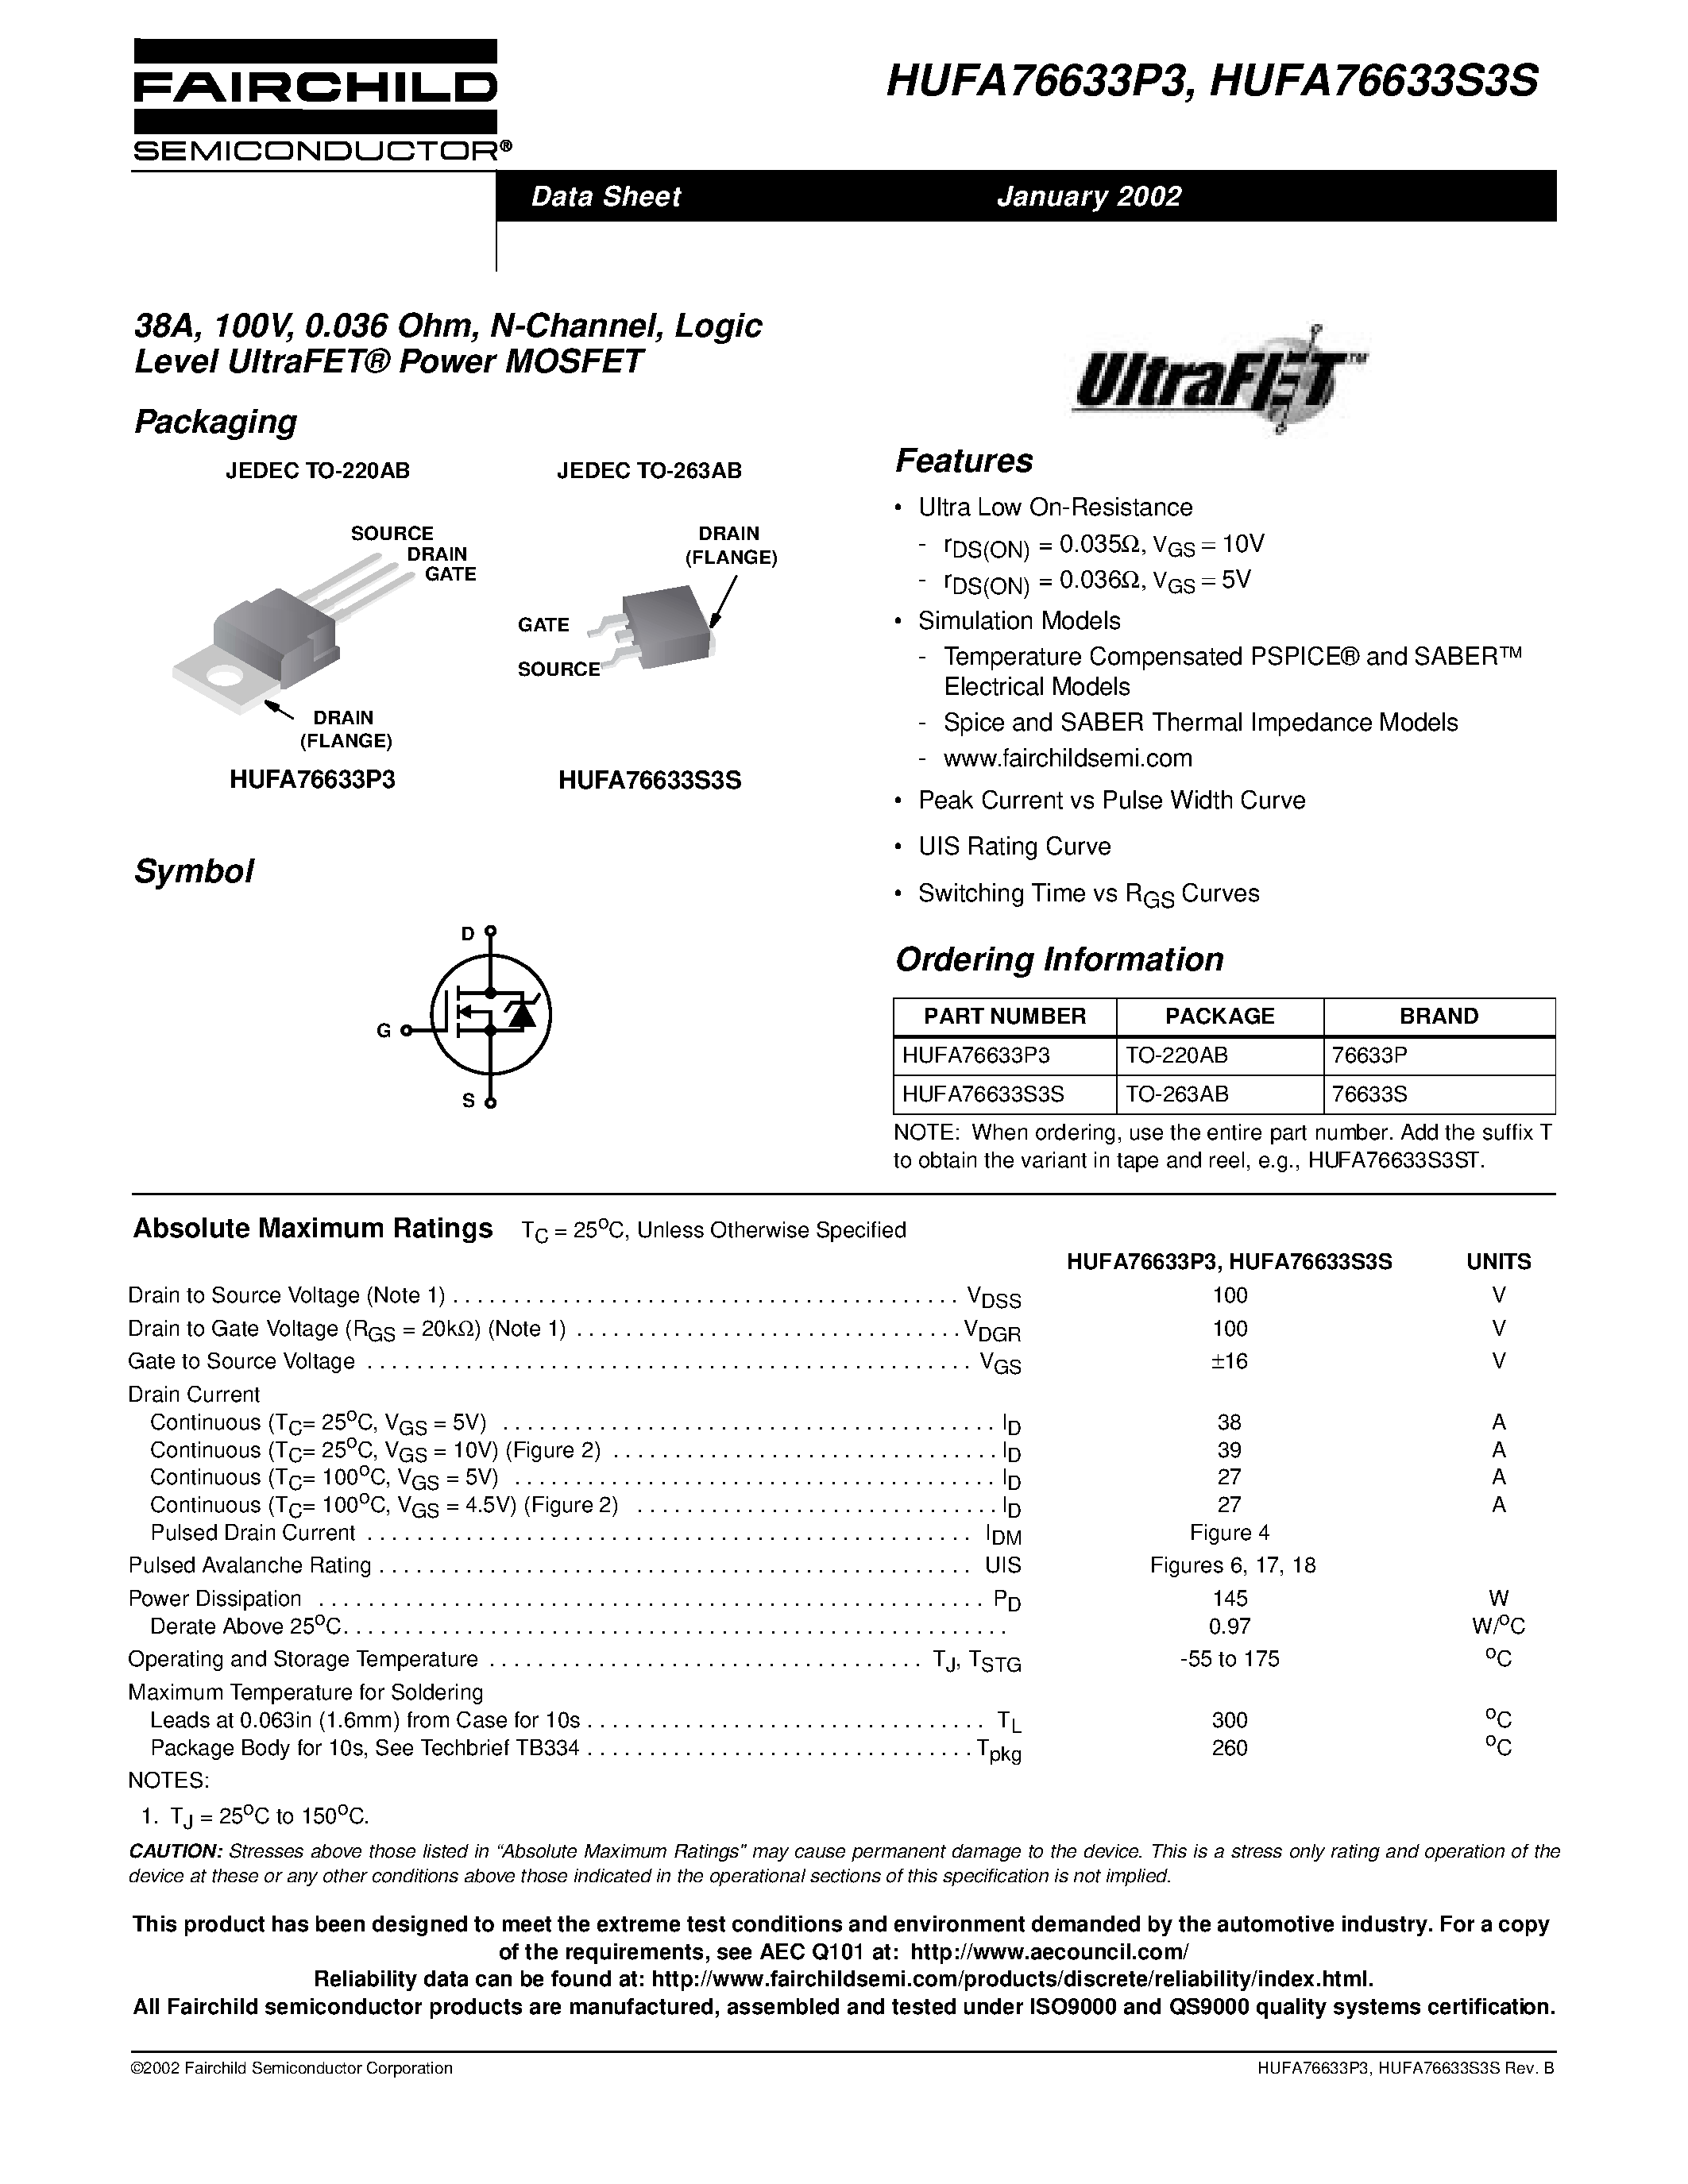 Datasheet HUFA76633P3 - 38A/ 100V/ 0.036 Ohm/ N-Channel/ Logic Level UltraFET Power MOSFET page 1